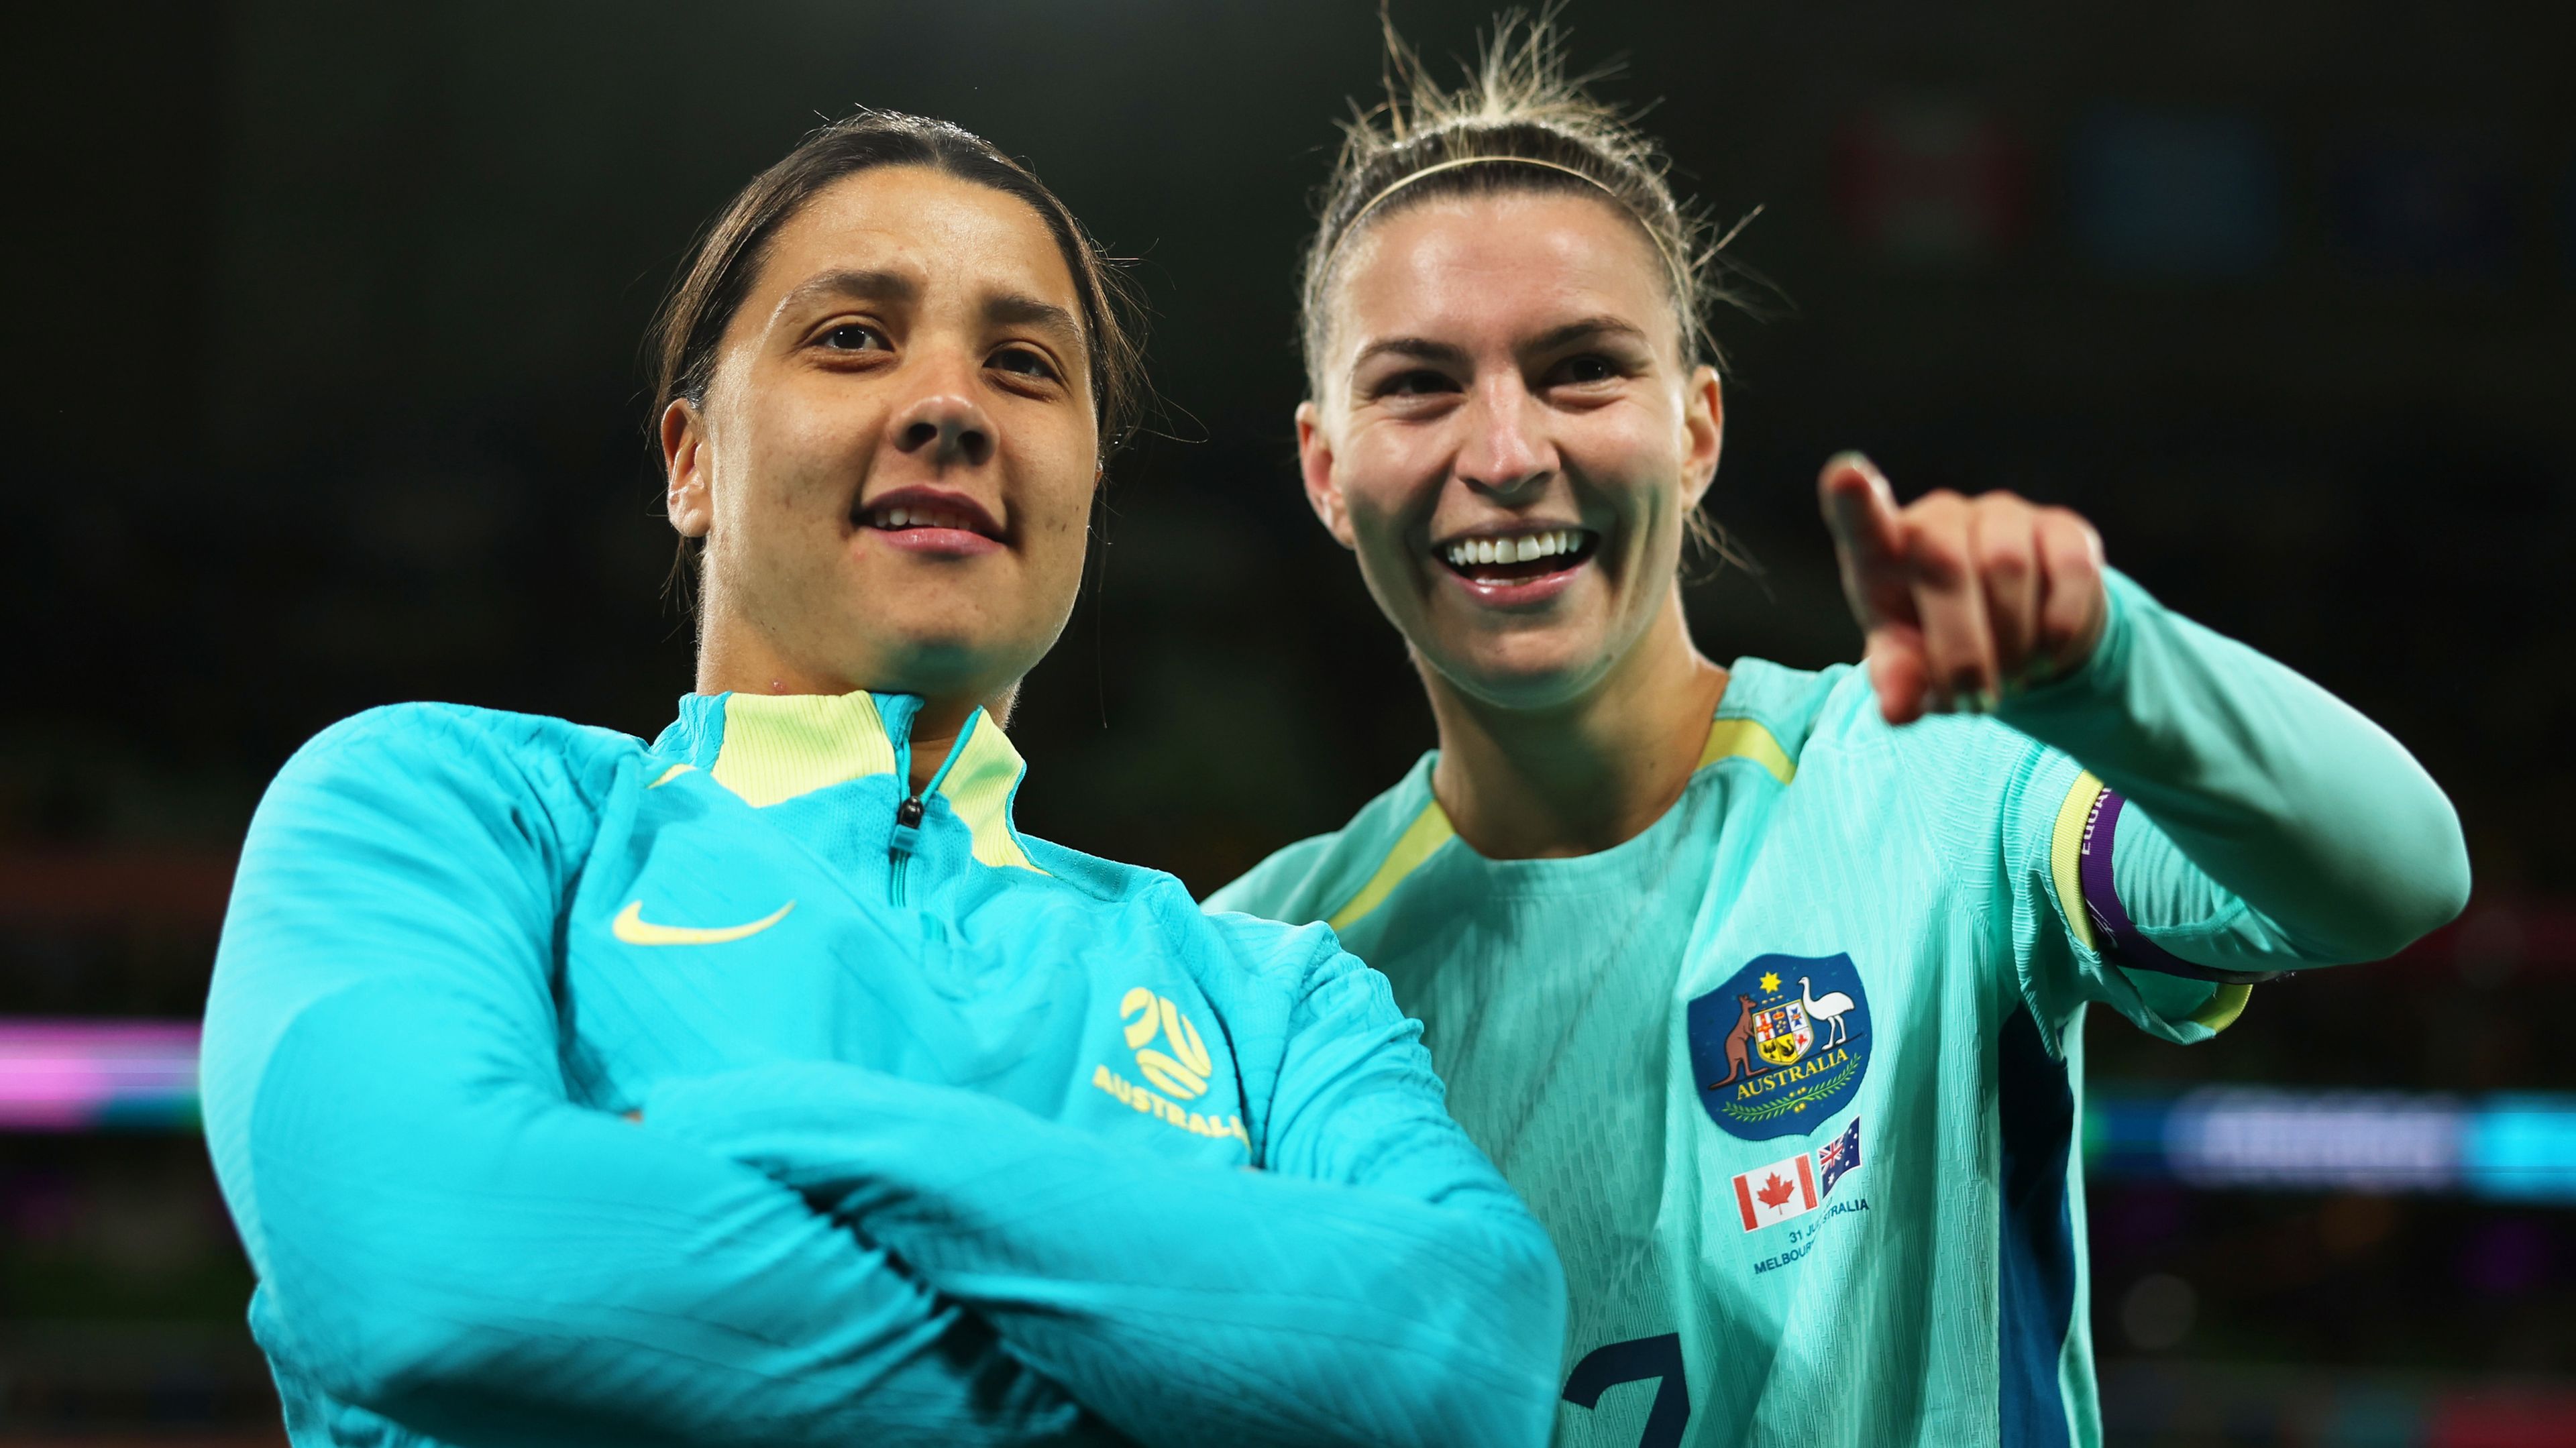 MELBOURNE, AUSTRALIA - JULY 31: Sam Kerr and Steph Catley of Australia applaud fans after the team&#x27;s 4-0 victory and qualification for the knockout stage following the FIFA Women&#x27;s World Cup Australia &amp; New Zealand 2023 Group B match between Canada and Australia at Melbourne Rectangular Stadium on July 31, 2023 in Melbourne, Australia. (Photo by Alex Pantling - FIFA/FIFA via Getty Images)